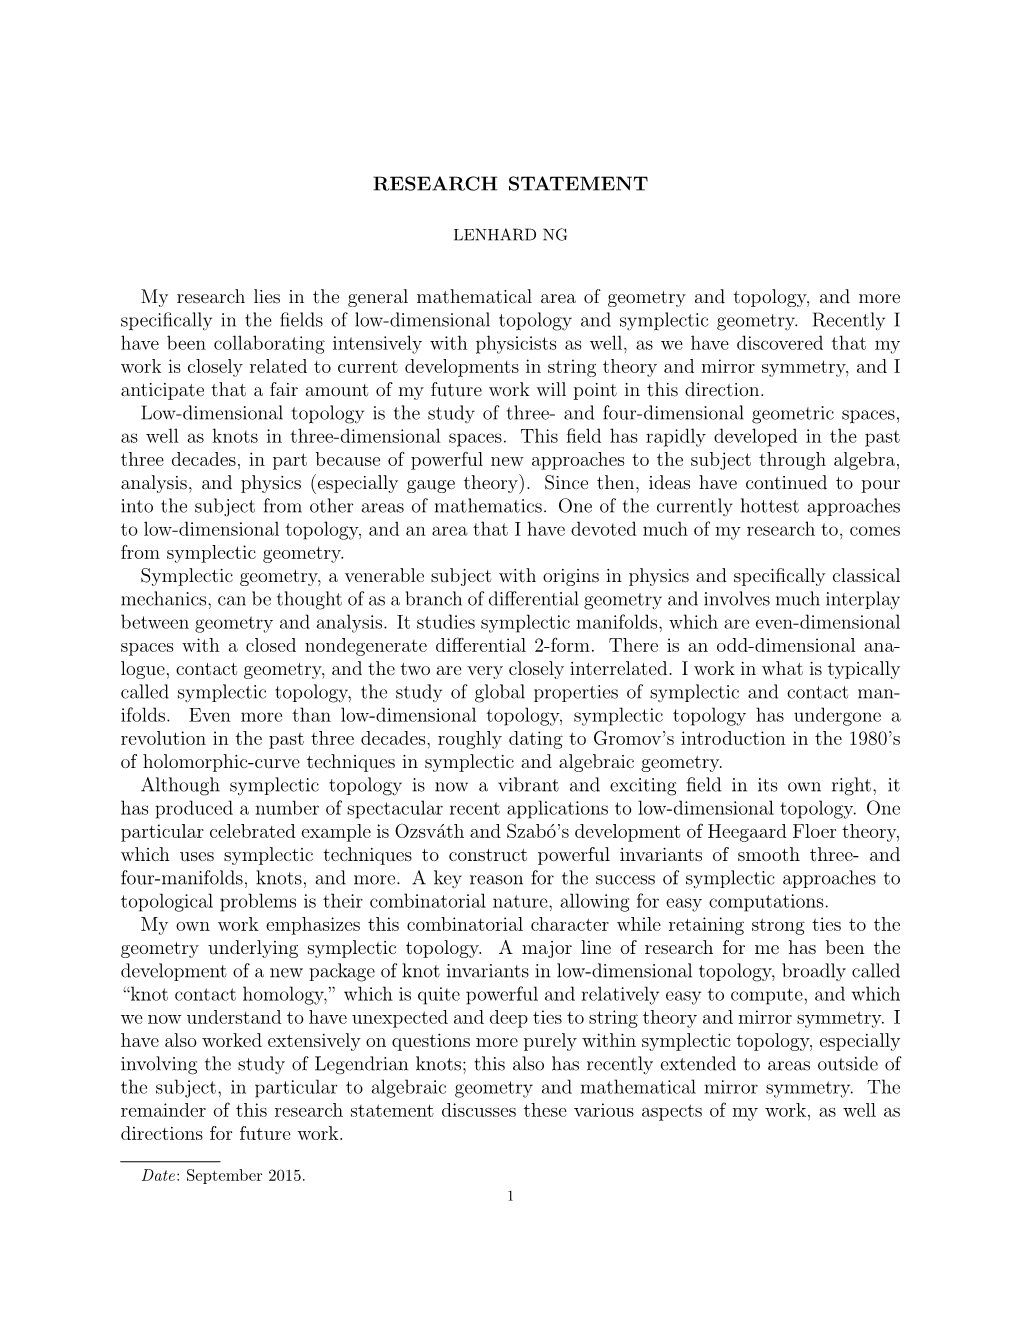 RESEARCH STATEMENT My Research Lies in the General